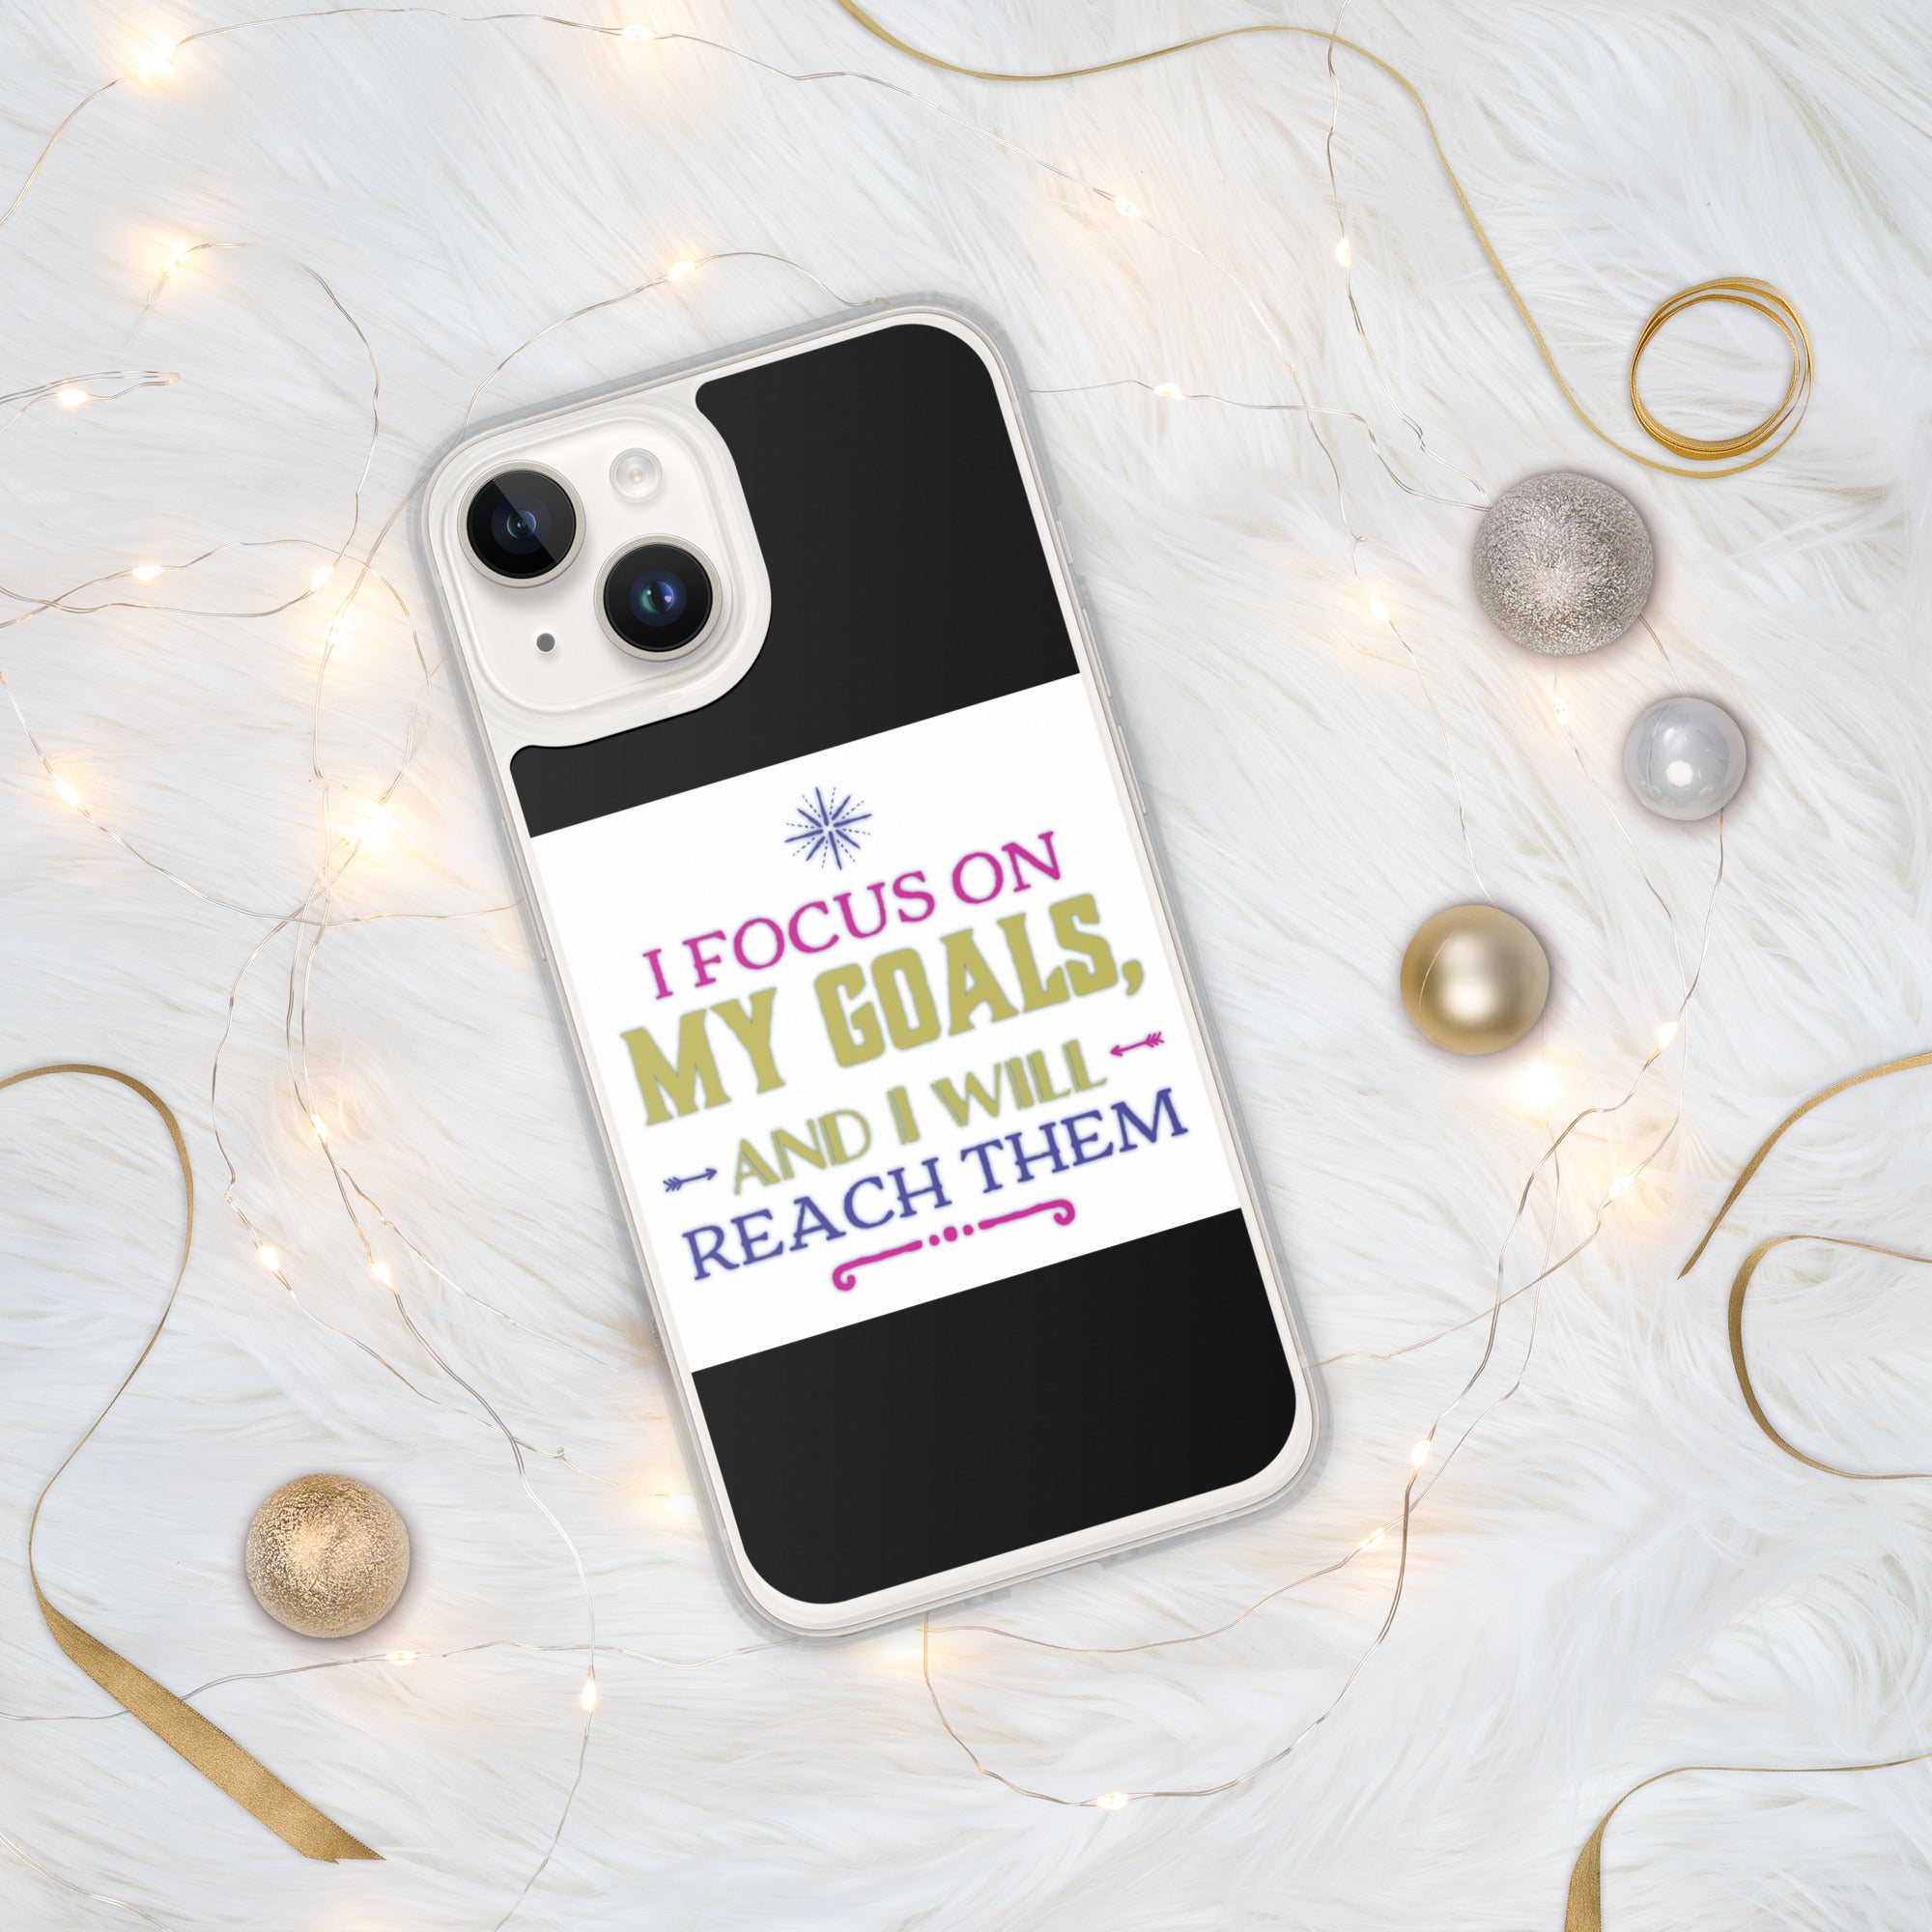 GloWell Designs - iPhone Case - Affirmation Quote - I Focus on My Goals - GloWell Designs